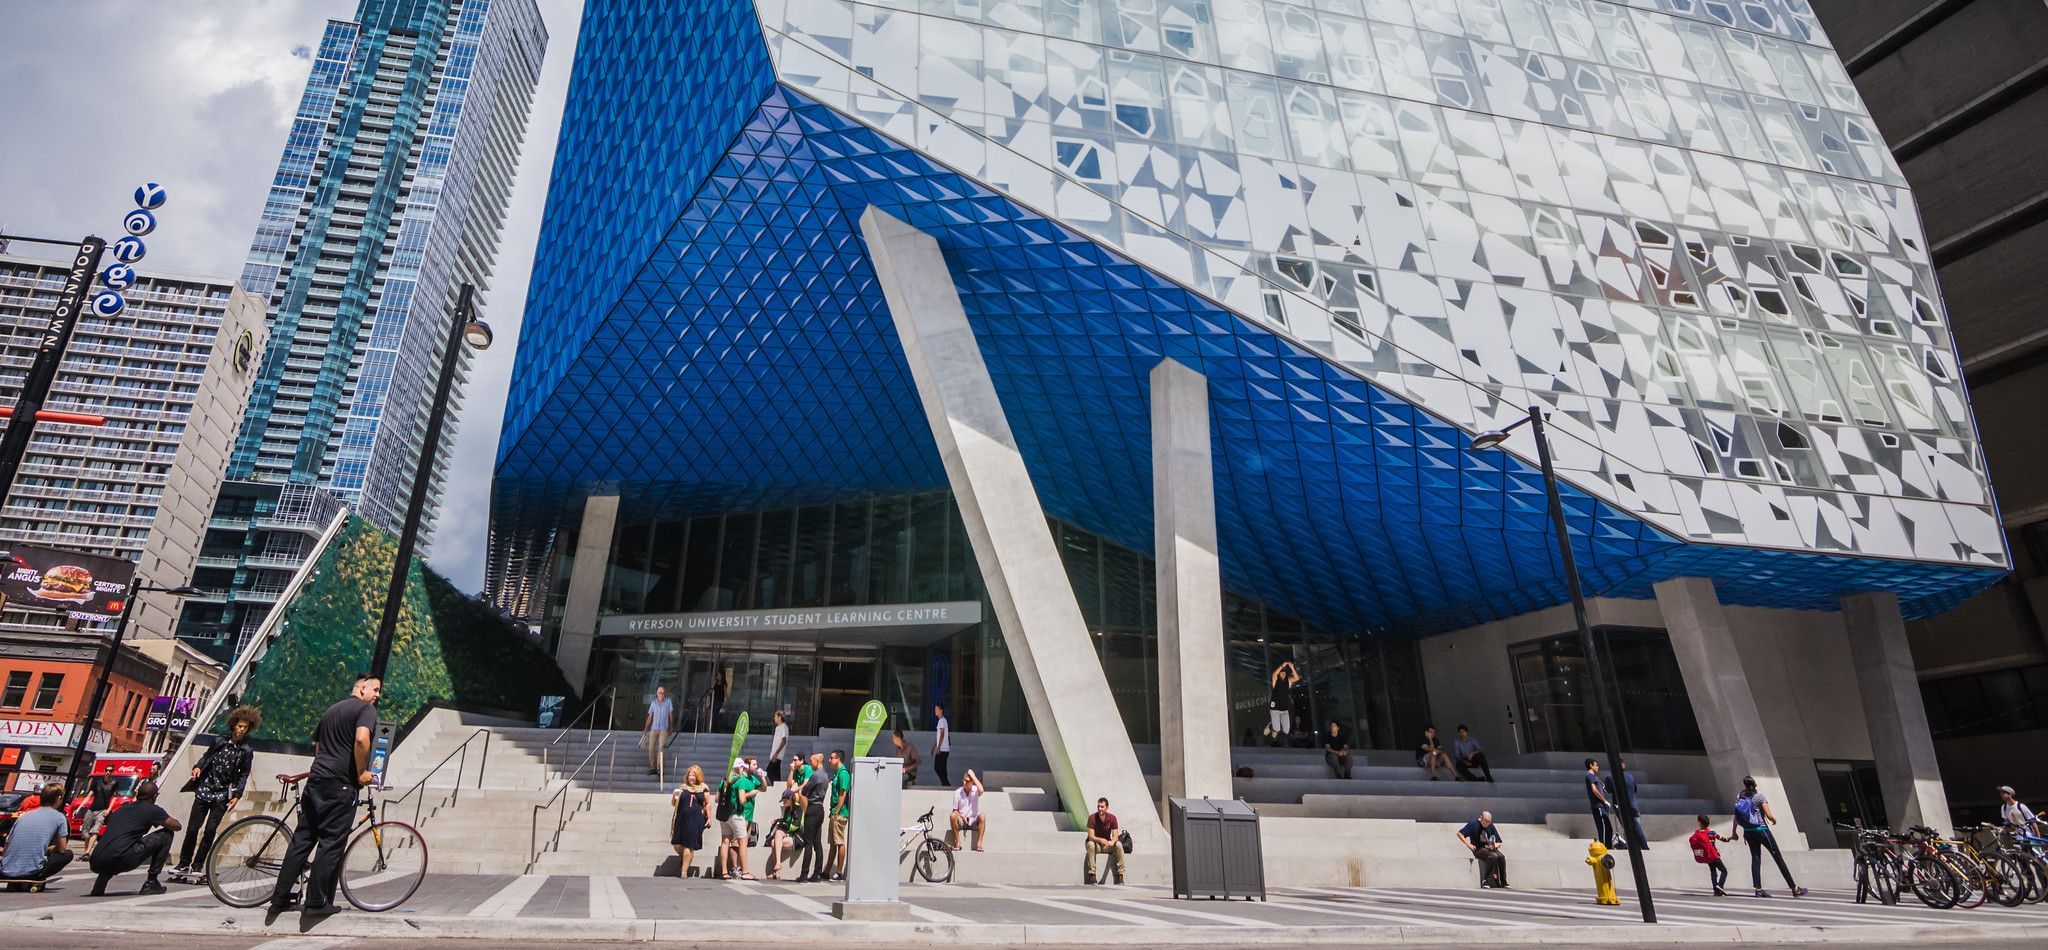 The new student services building at Ryerson University